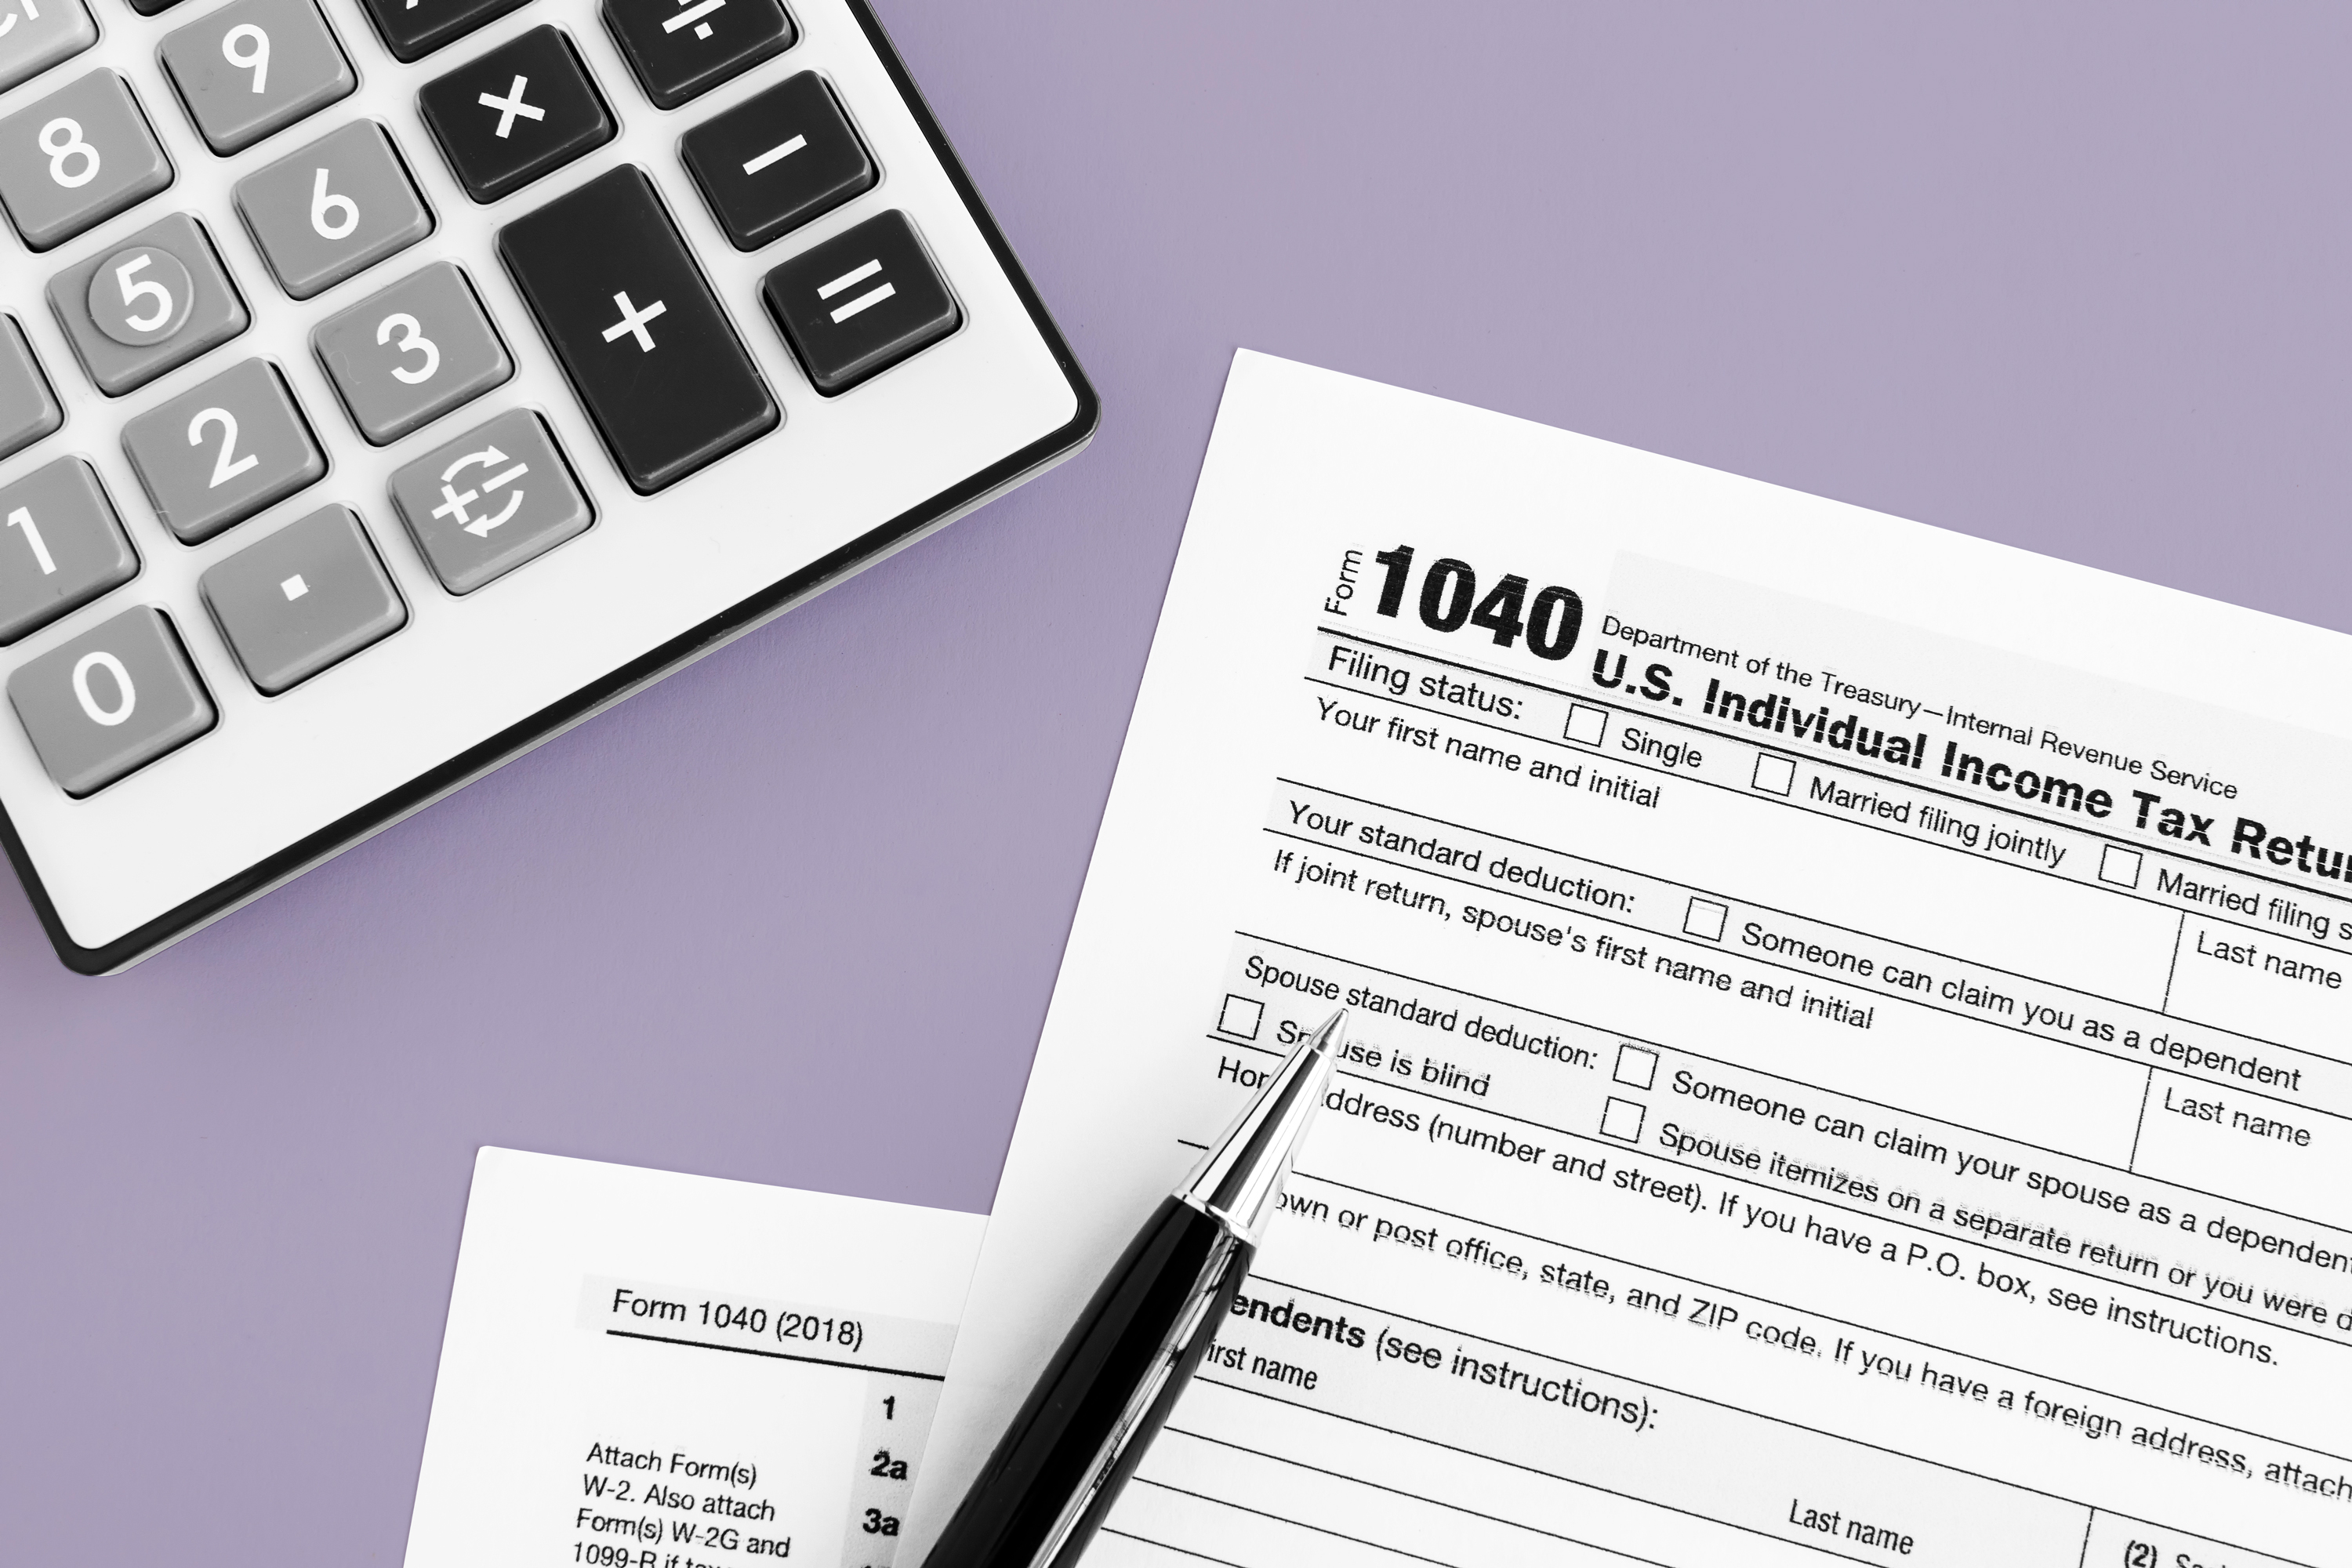 Friday Is the Tax Deadline if You Filed for an Extension Last Spring